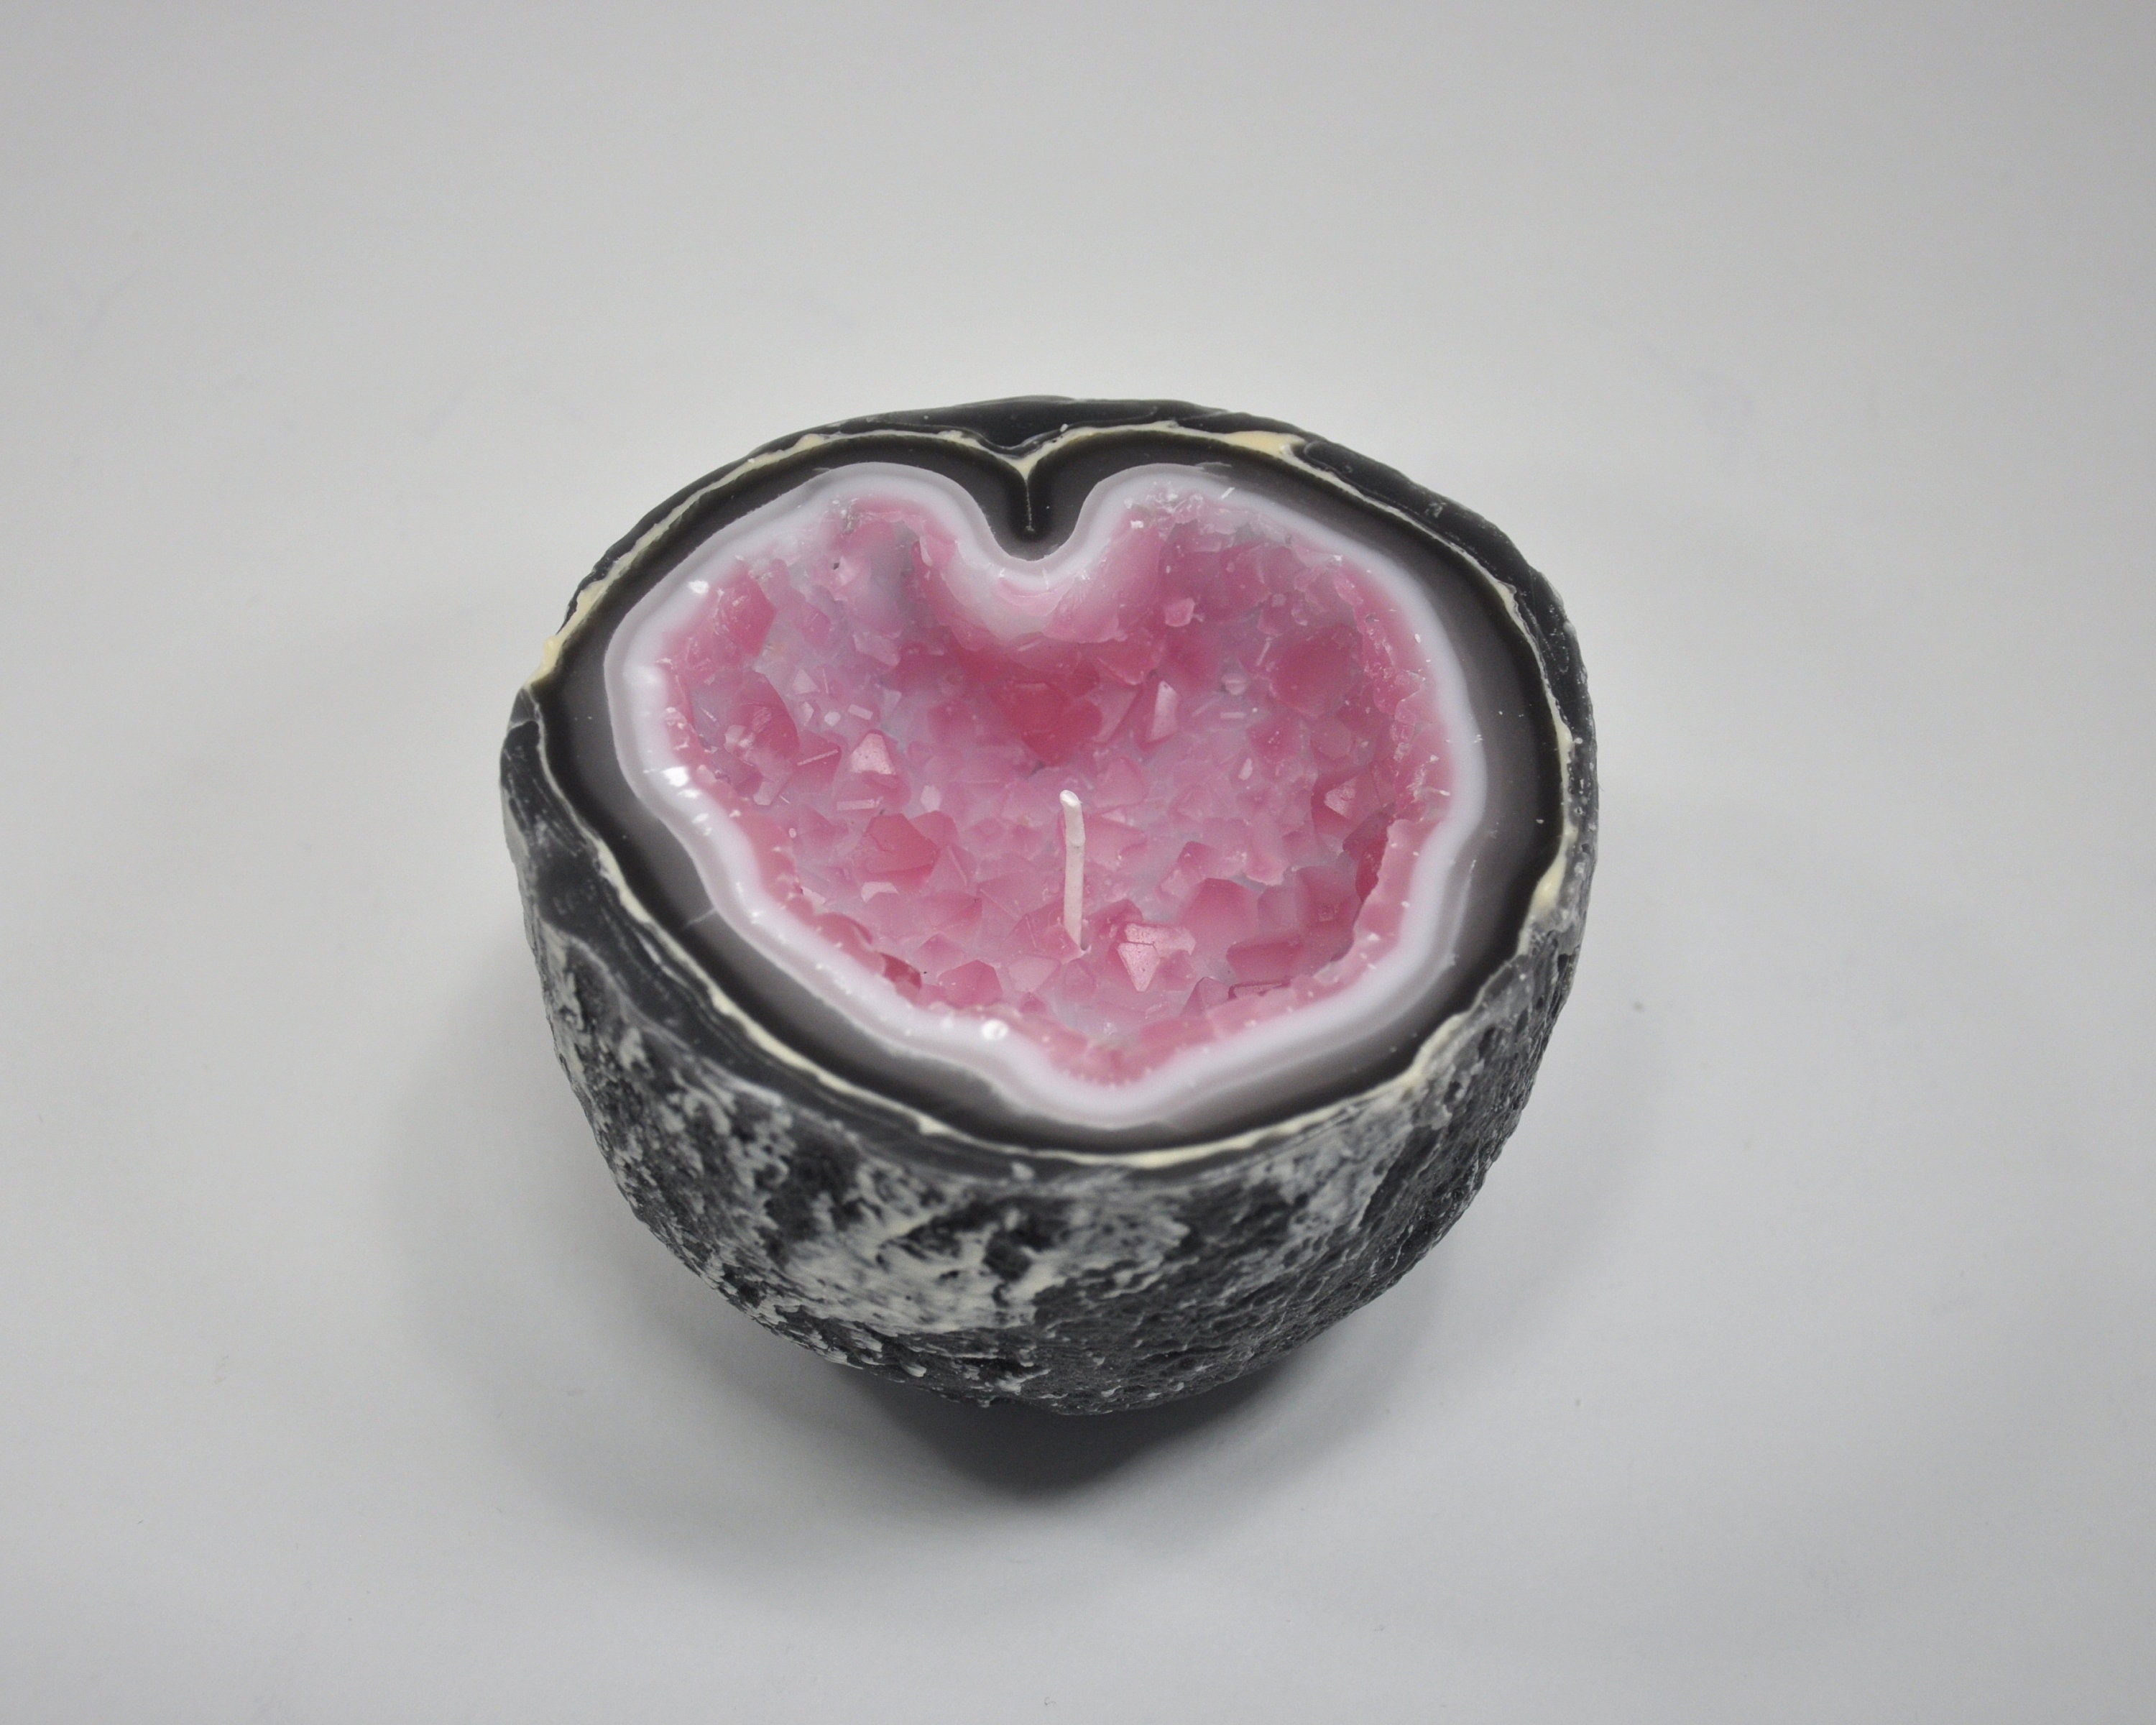 Rose Quartz Geode Heart Crystal Candle – Look Dollicious